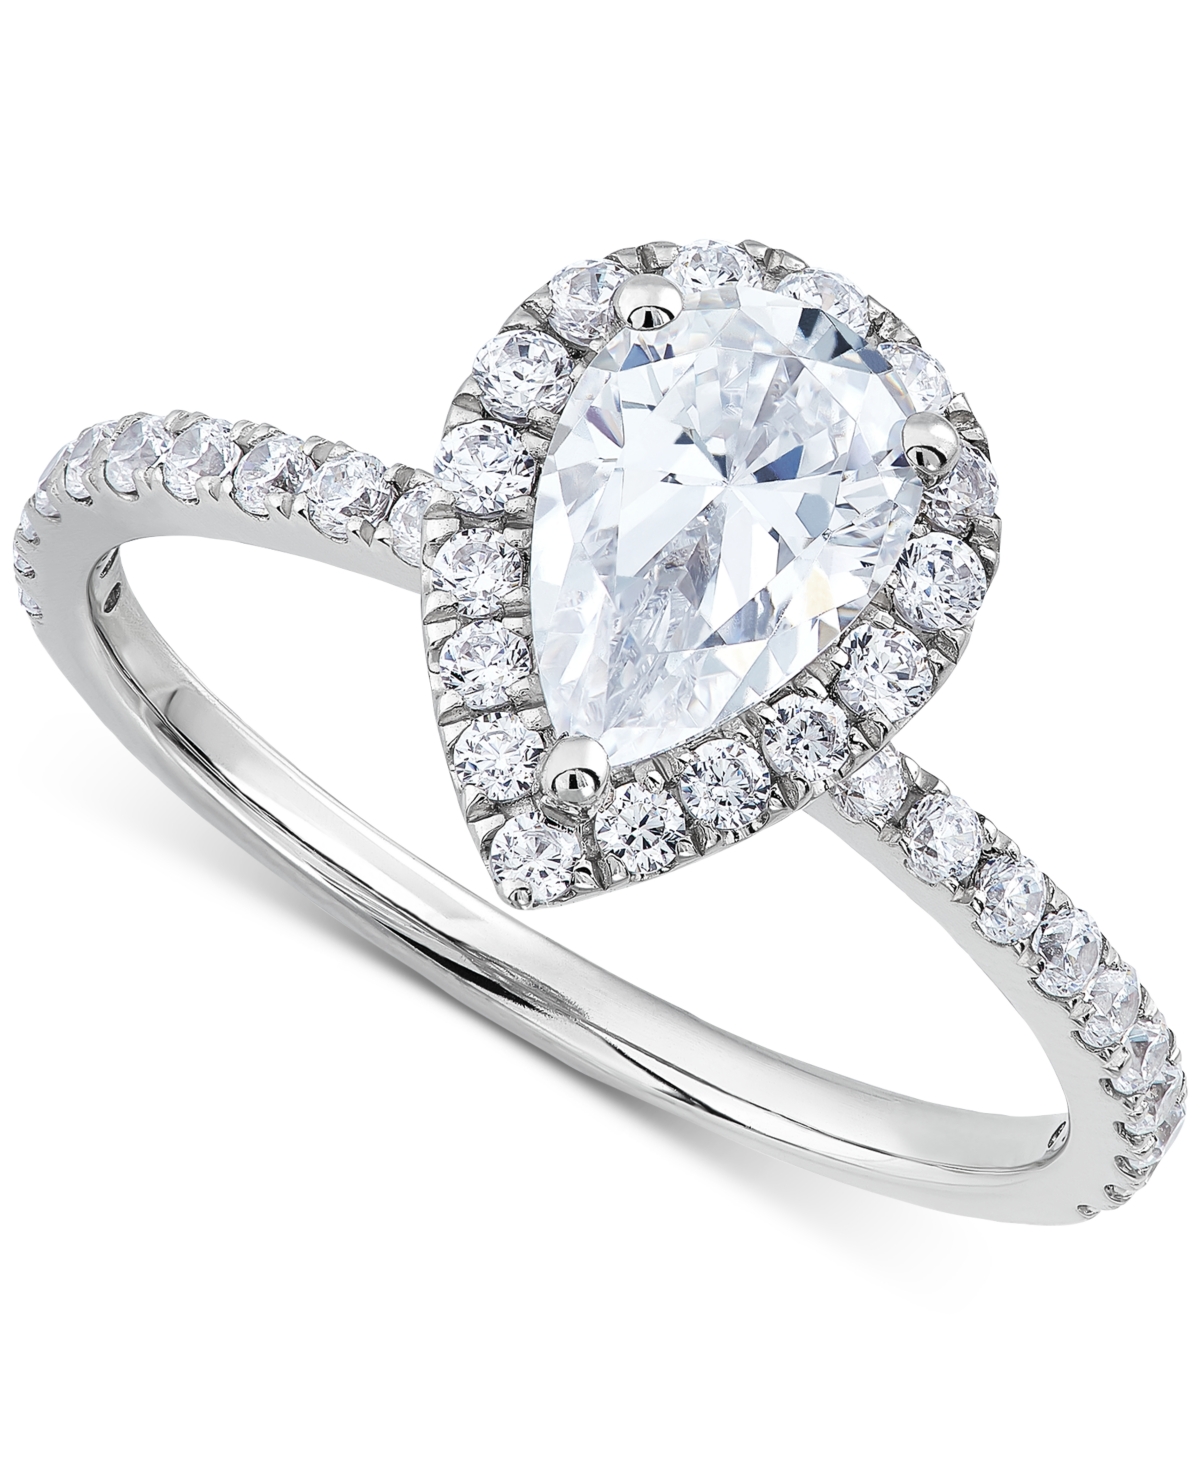 Igi Certified Lab Grown Diamond Pear-Cut Halo Engagement Ring (1-1/2 ct. t.w.) in 14k White Gold - White Gold